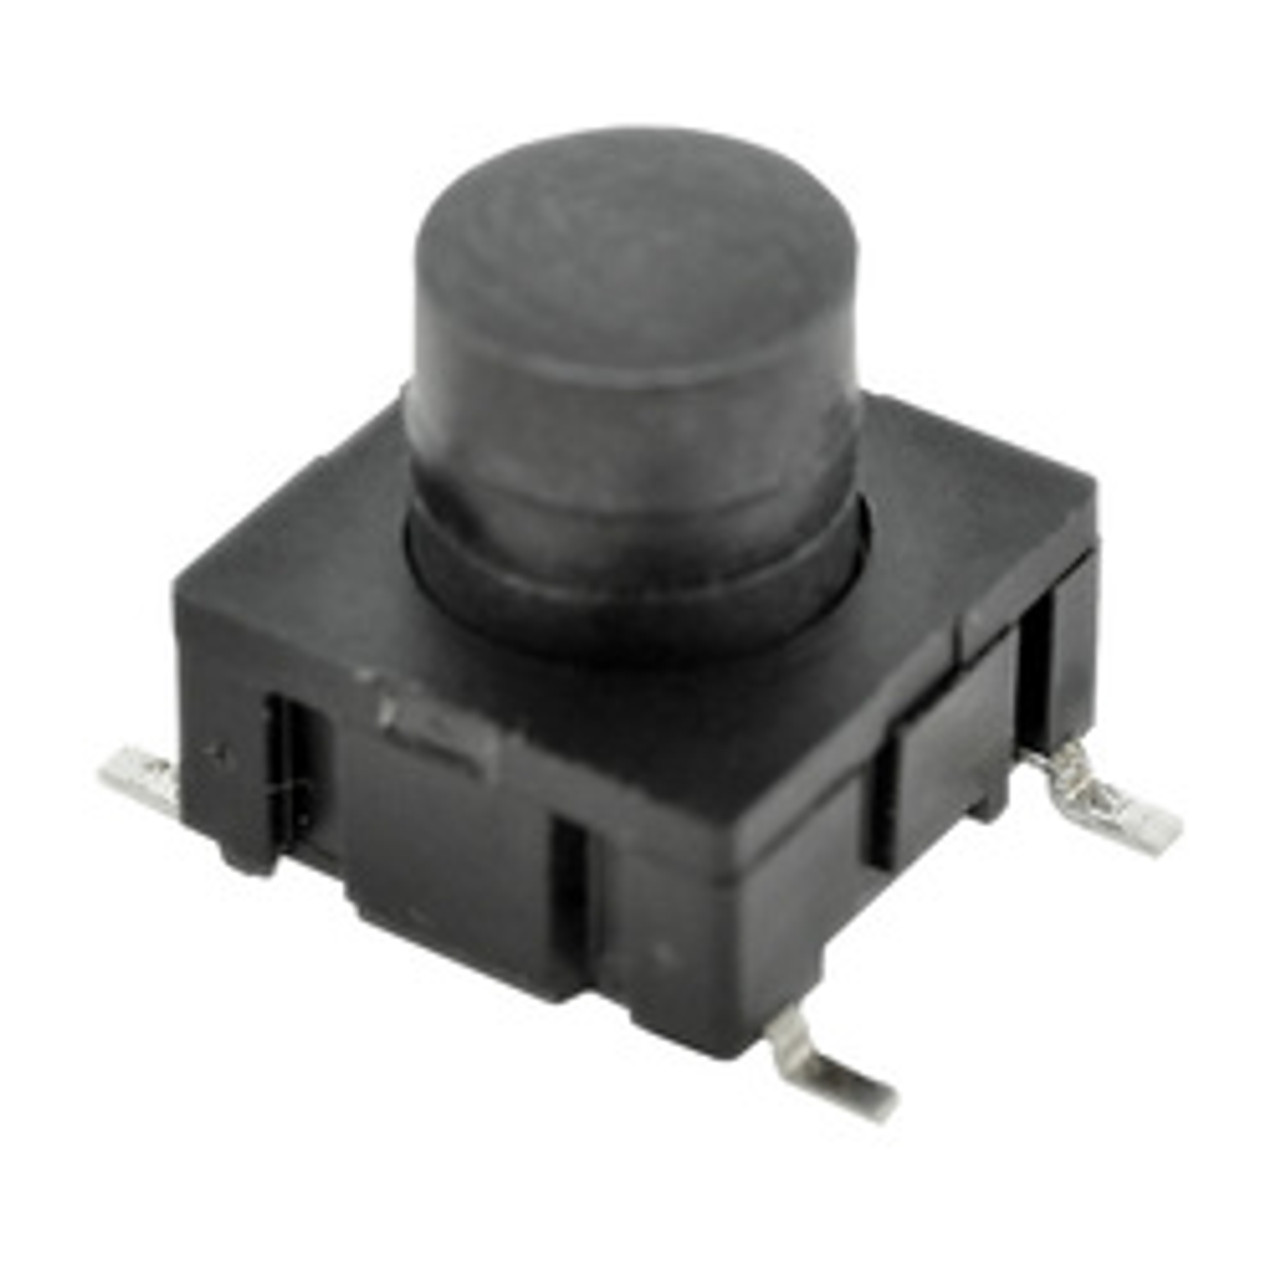 E-Switch TL6200GBLK Tactile Switches